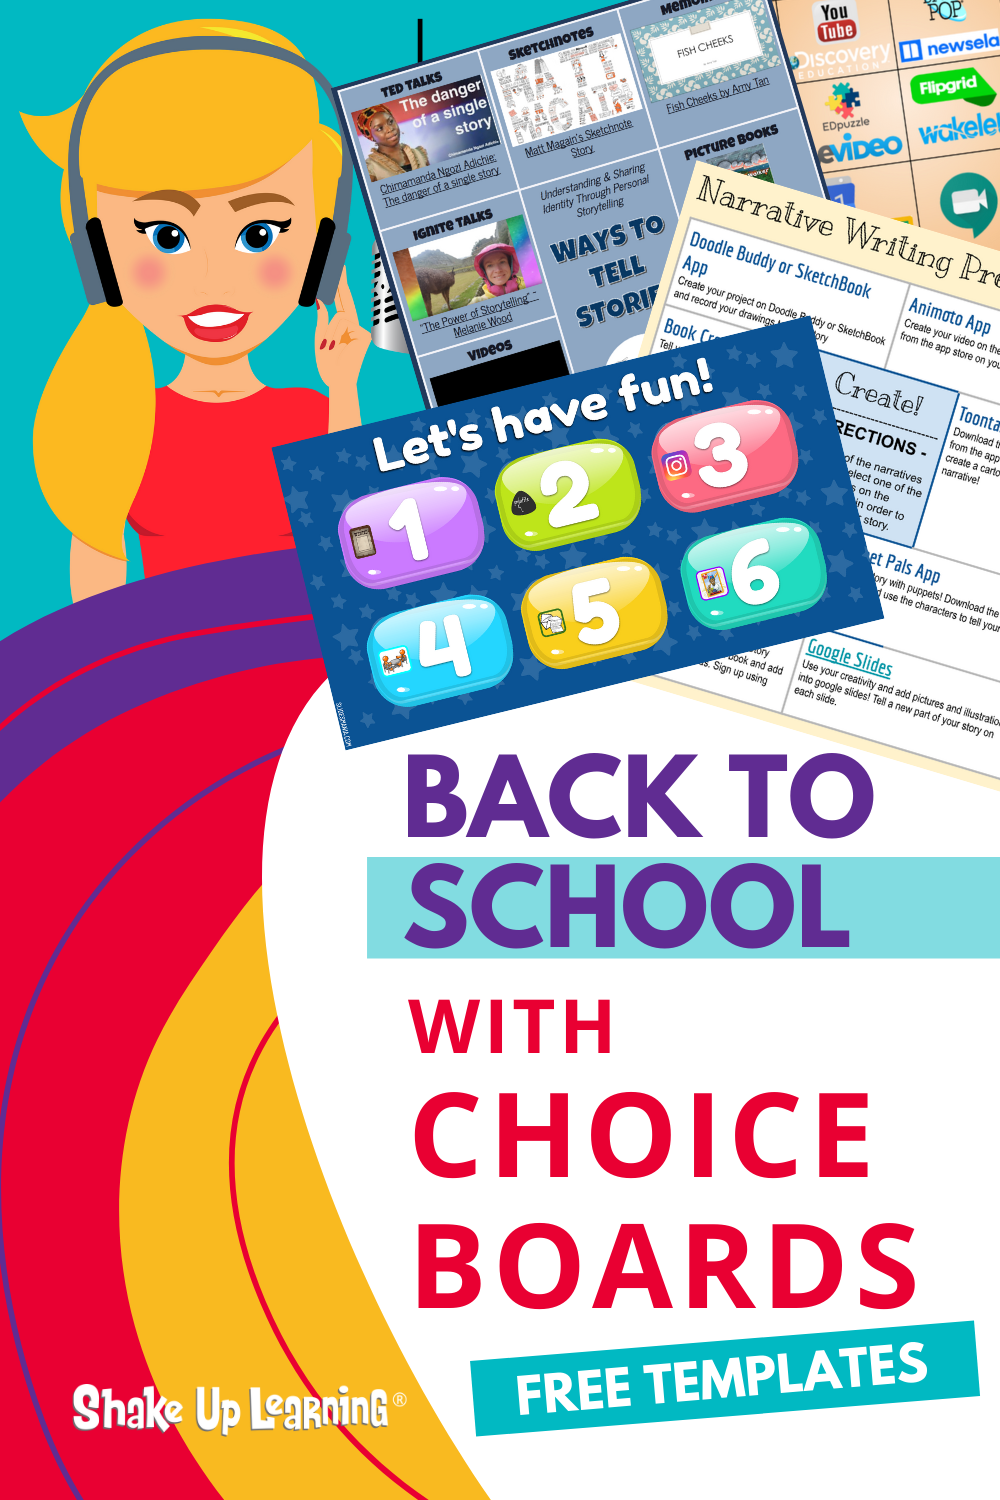 Back to School with Choice Boards